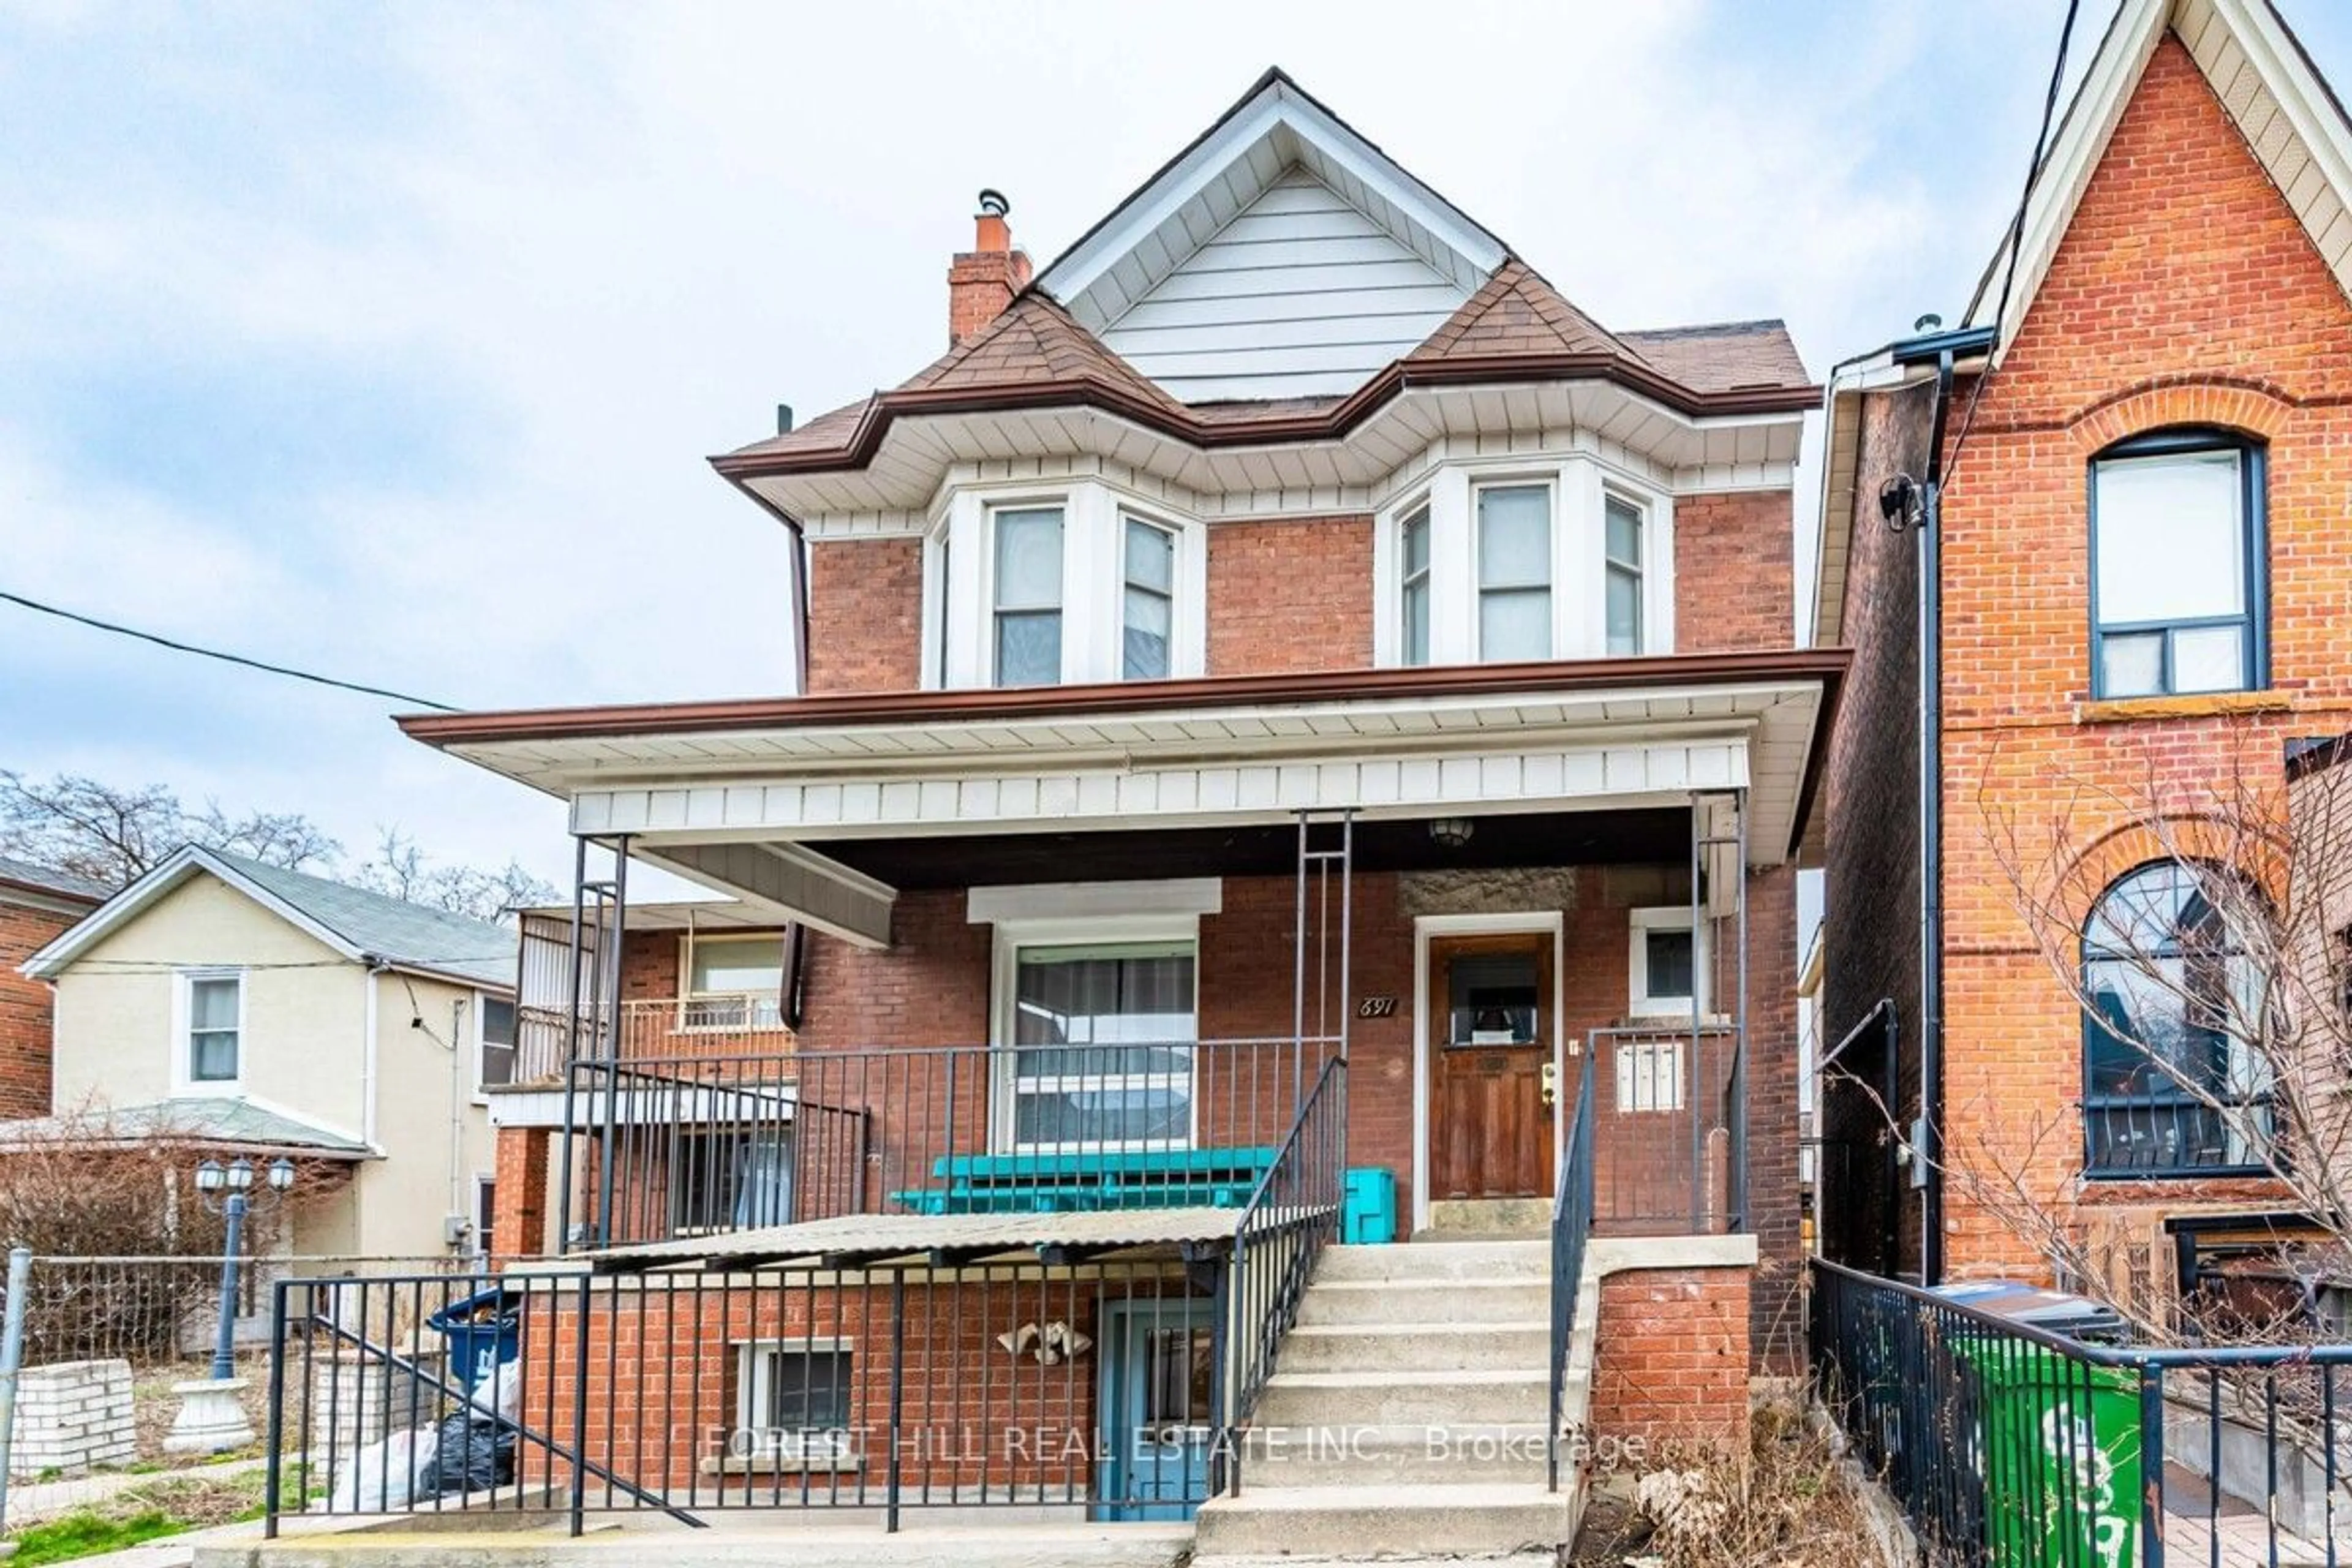 Home with unknown exterior material for 691 Ossington Ave, Toronto Ontario M6G 3T6